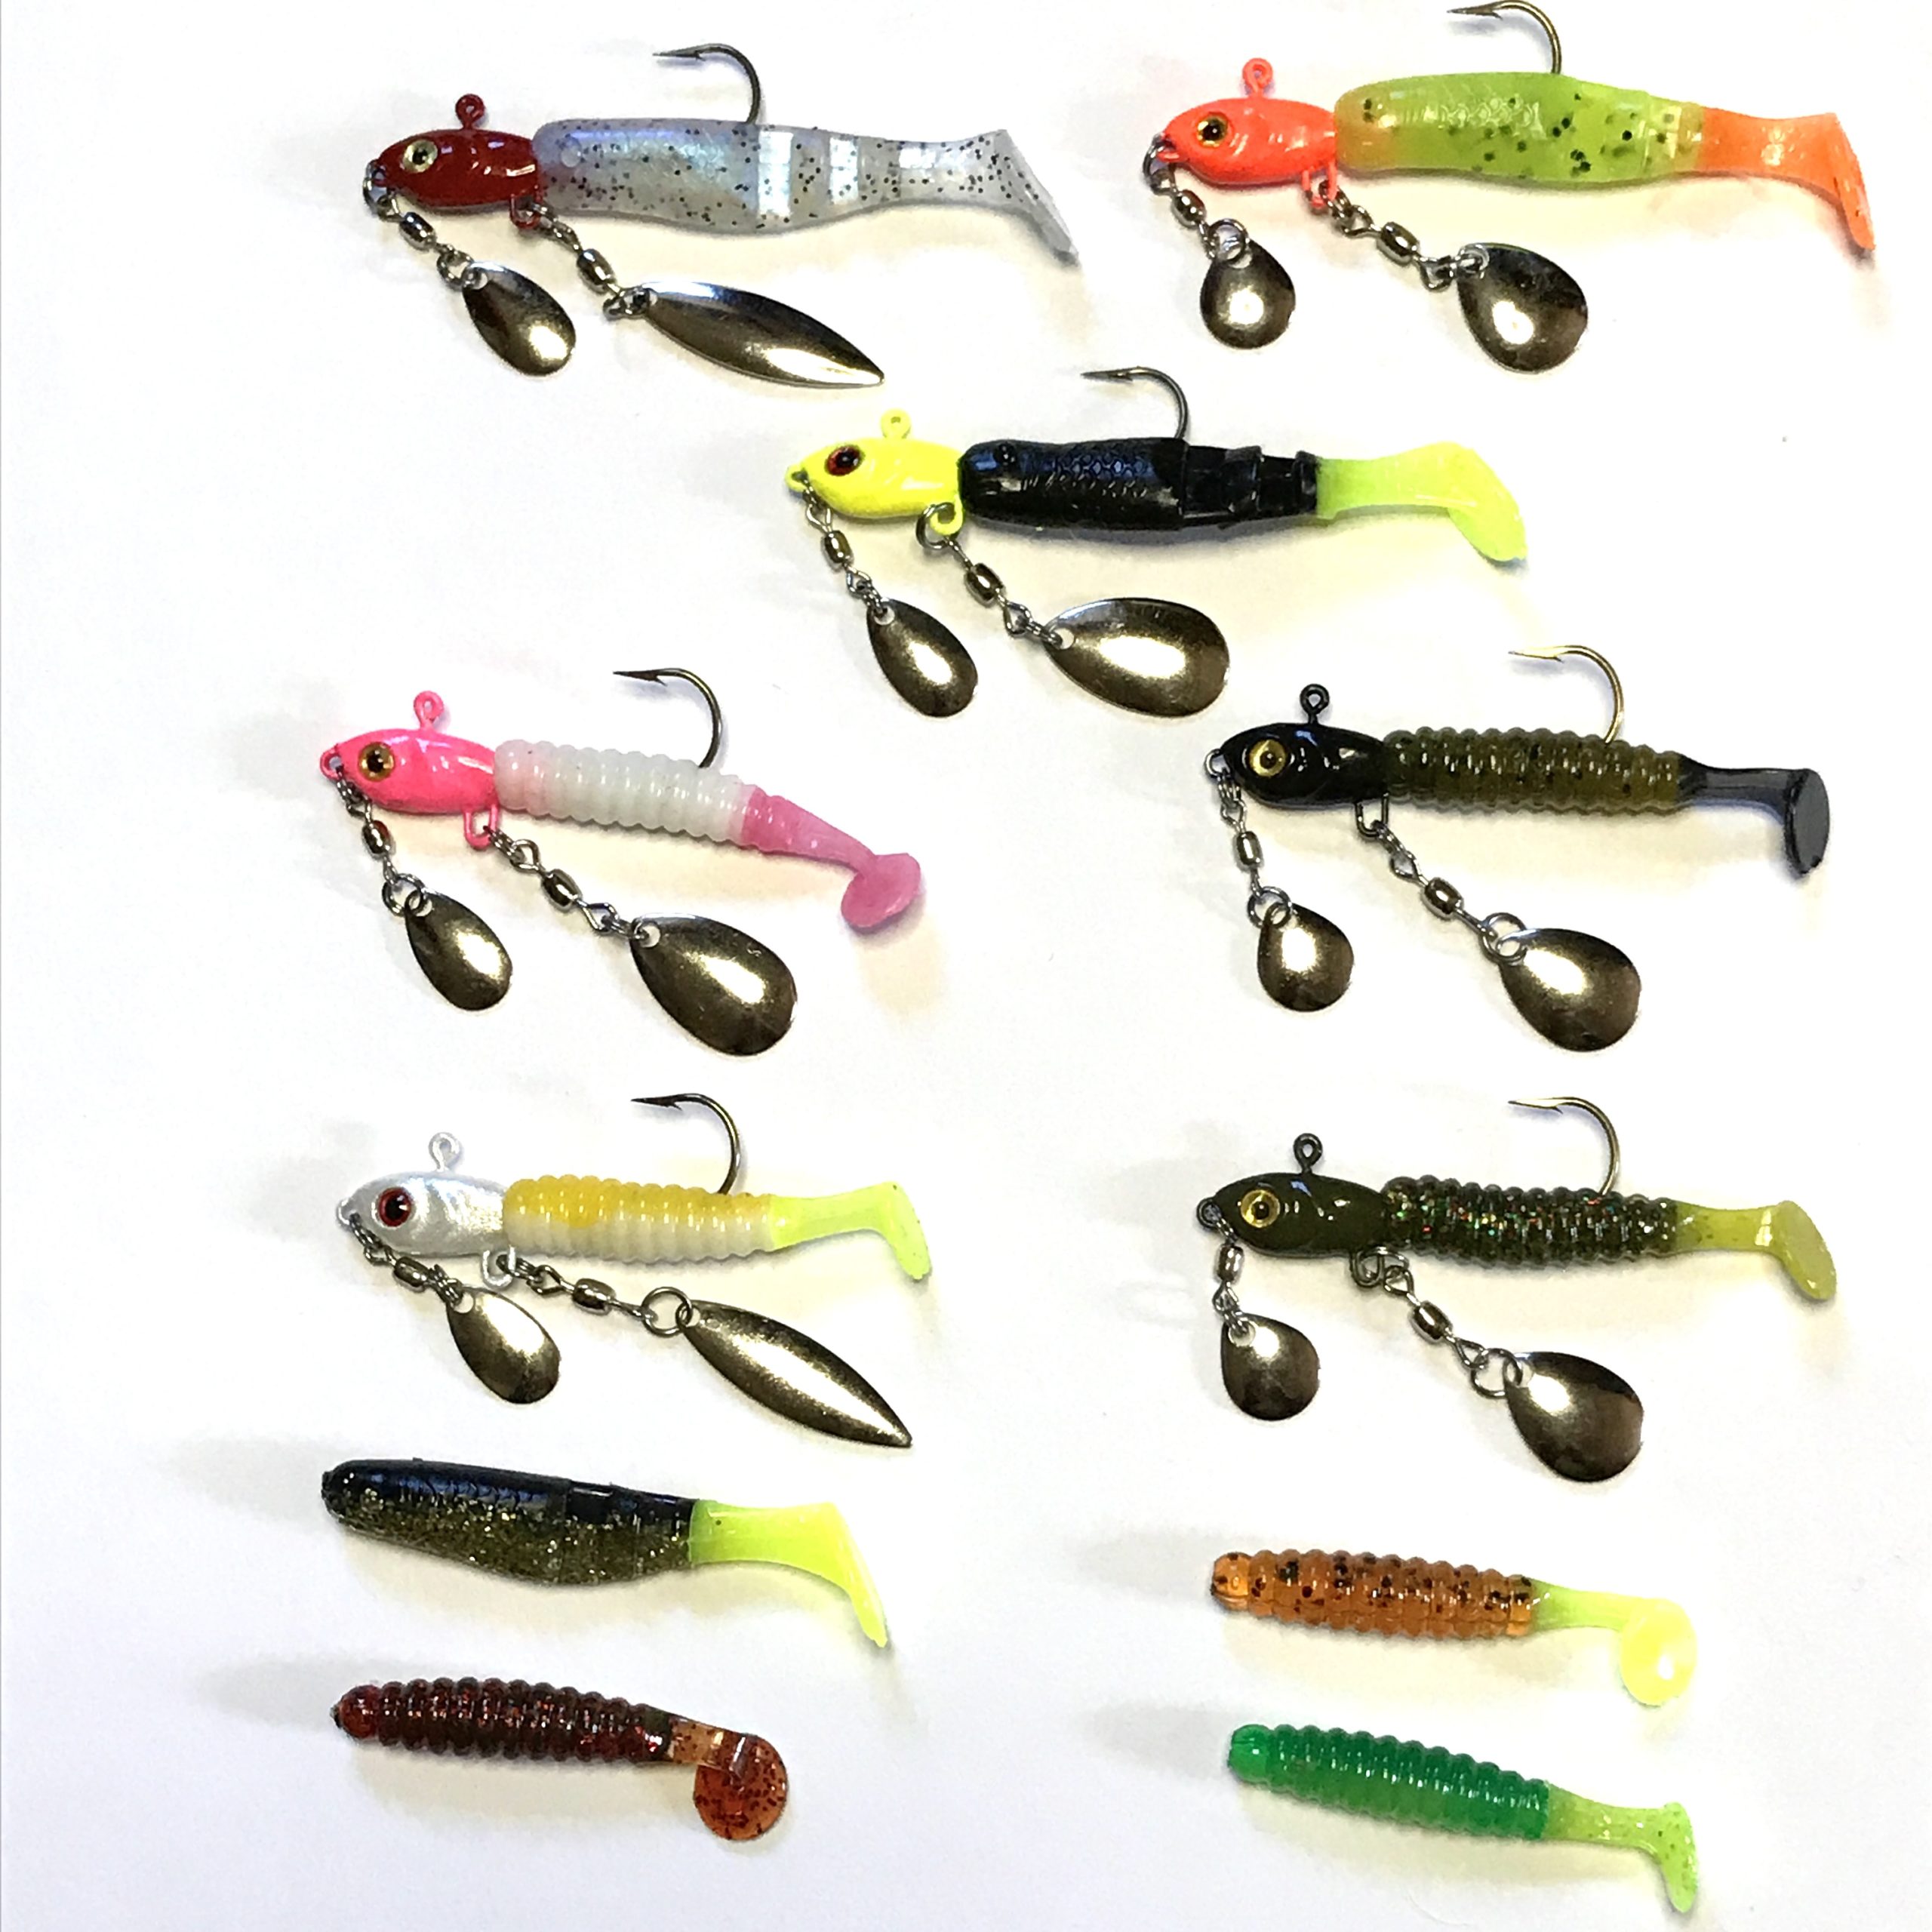 At Auction: Box of Crappie Fishing Jigs